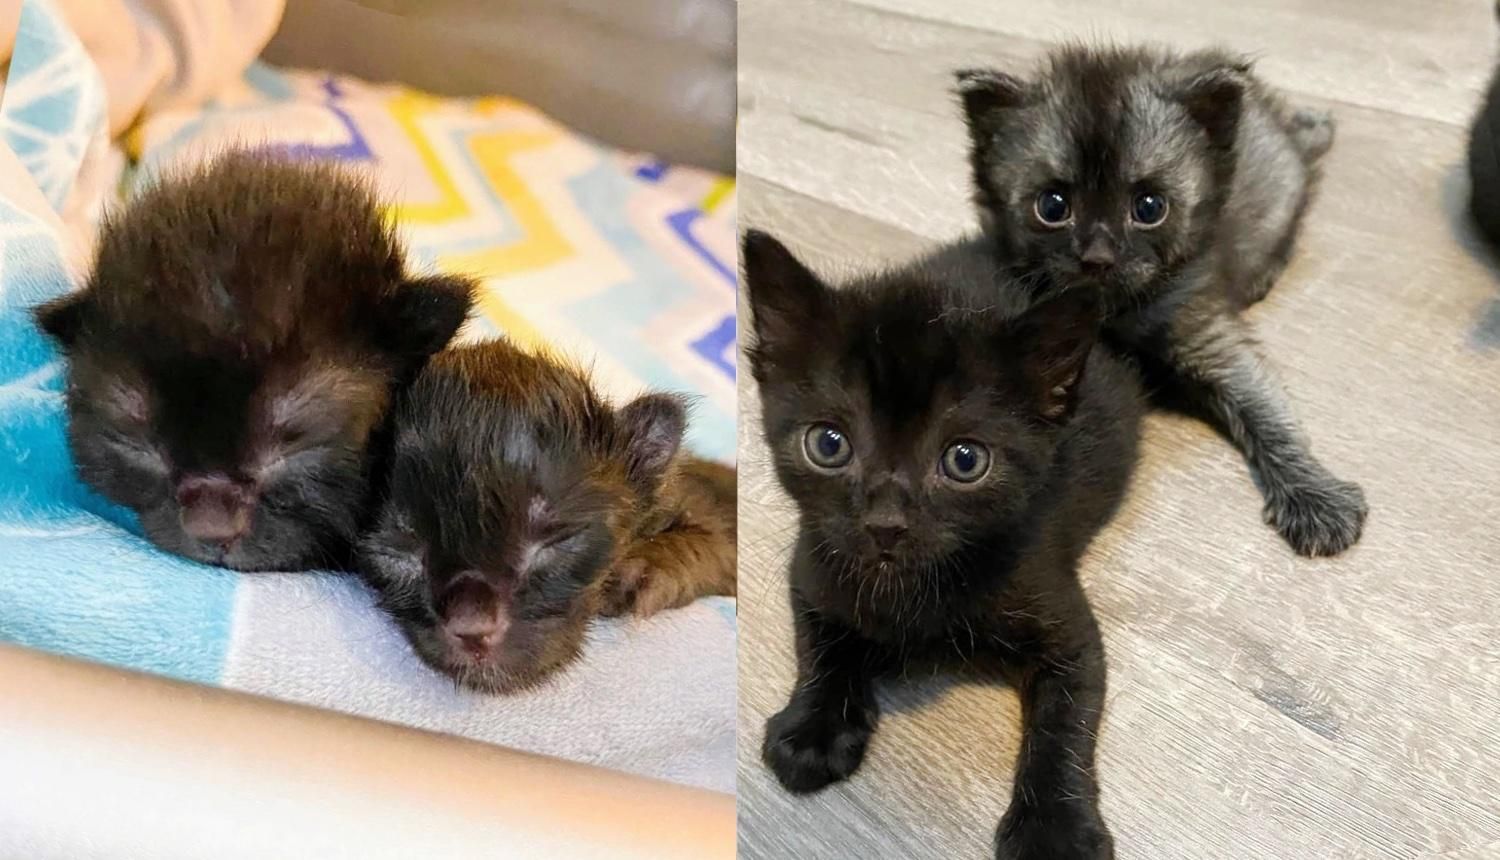 The Heartwarming Story of Two Cats Looking Out for Each Other Since They were Newborn Kittens